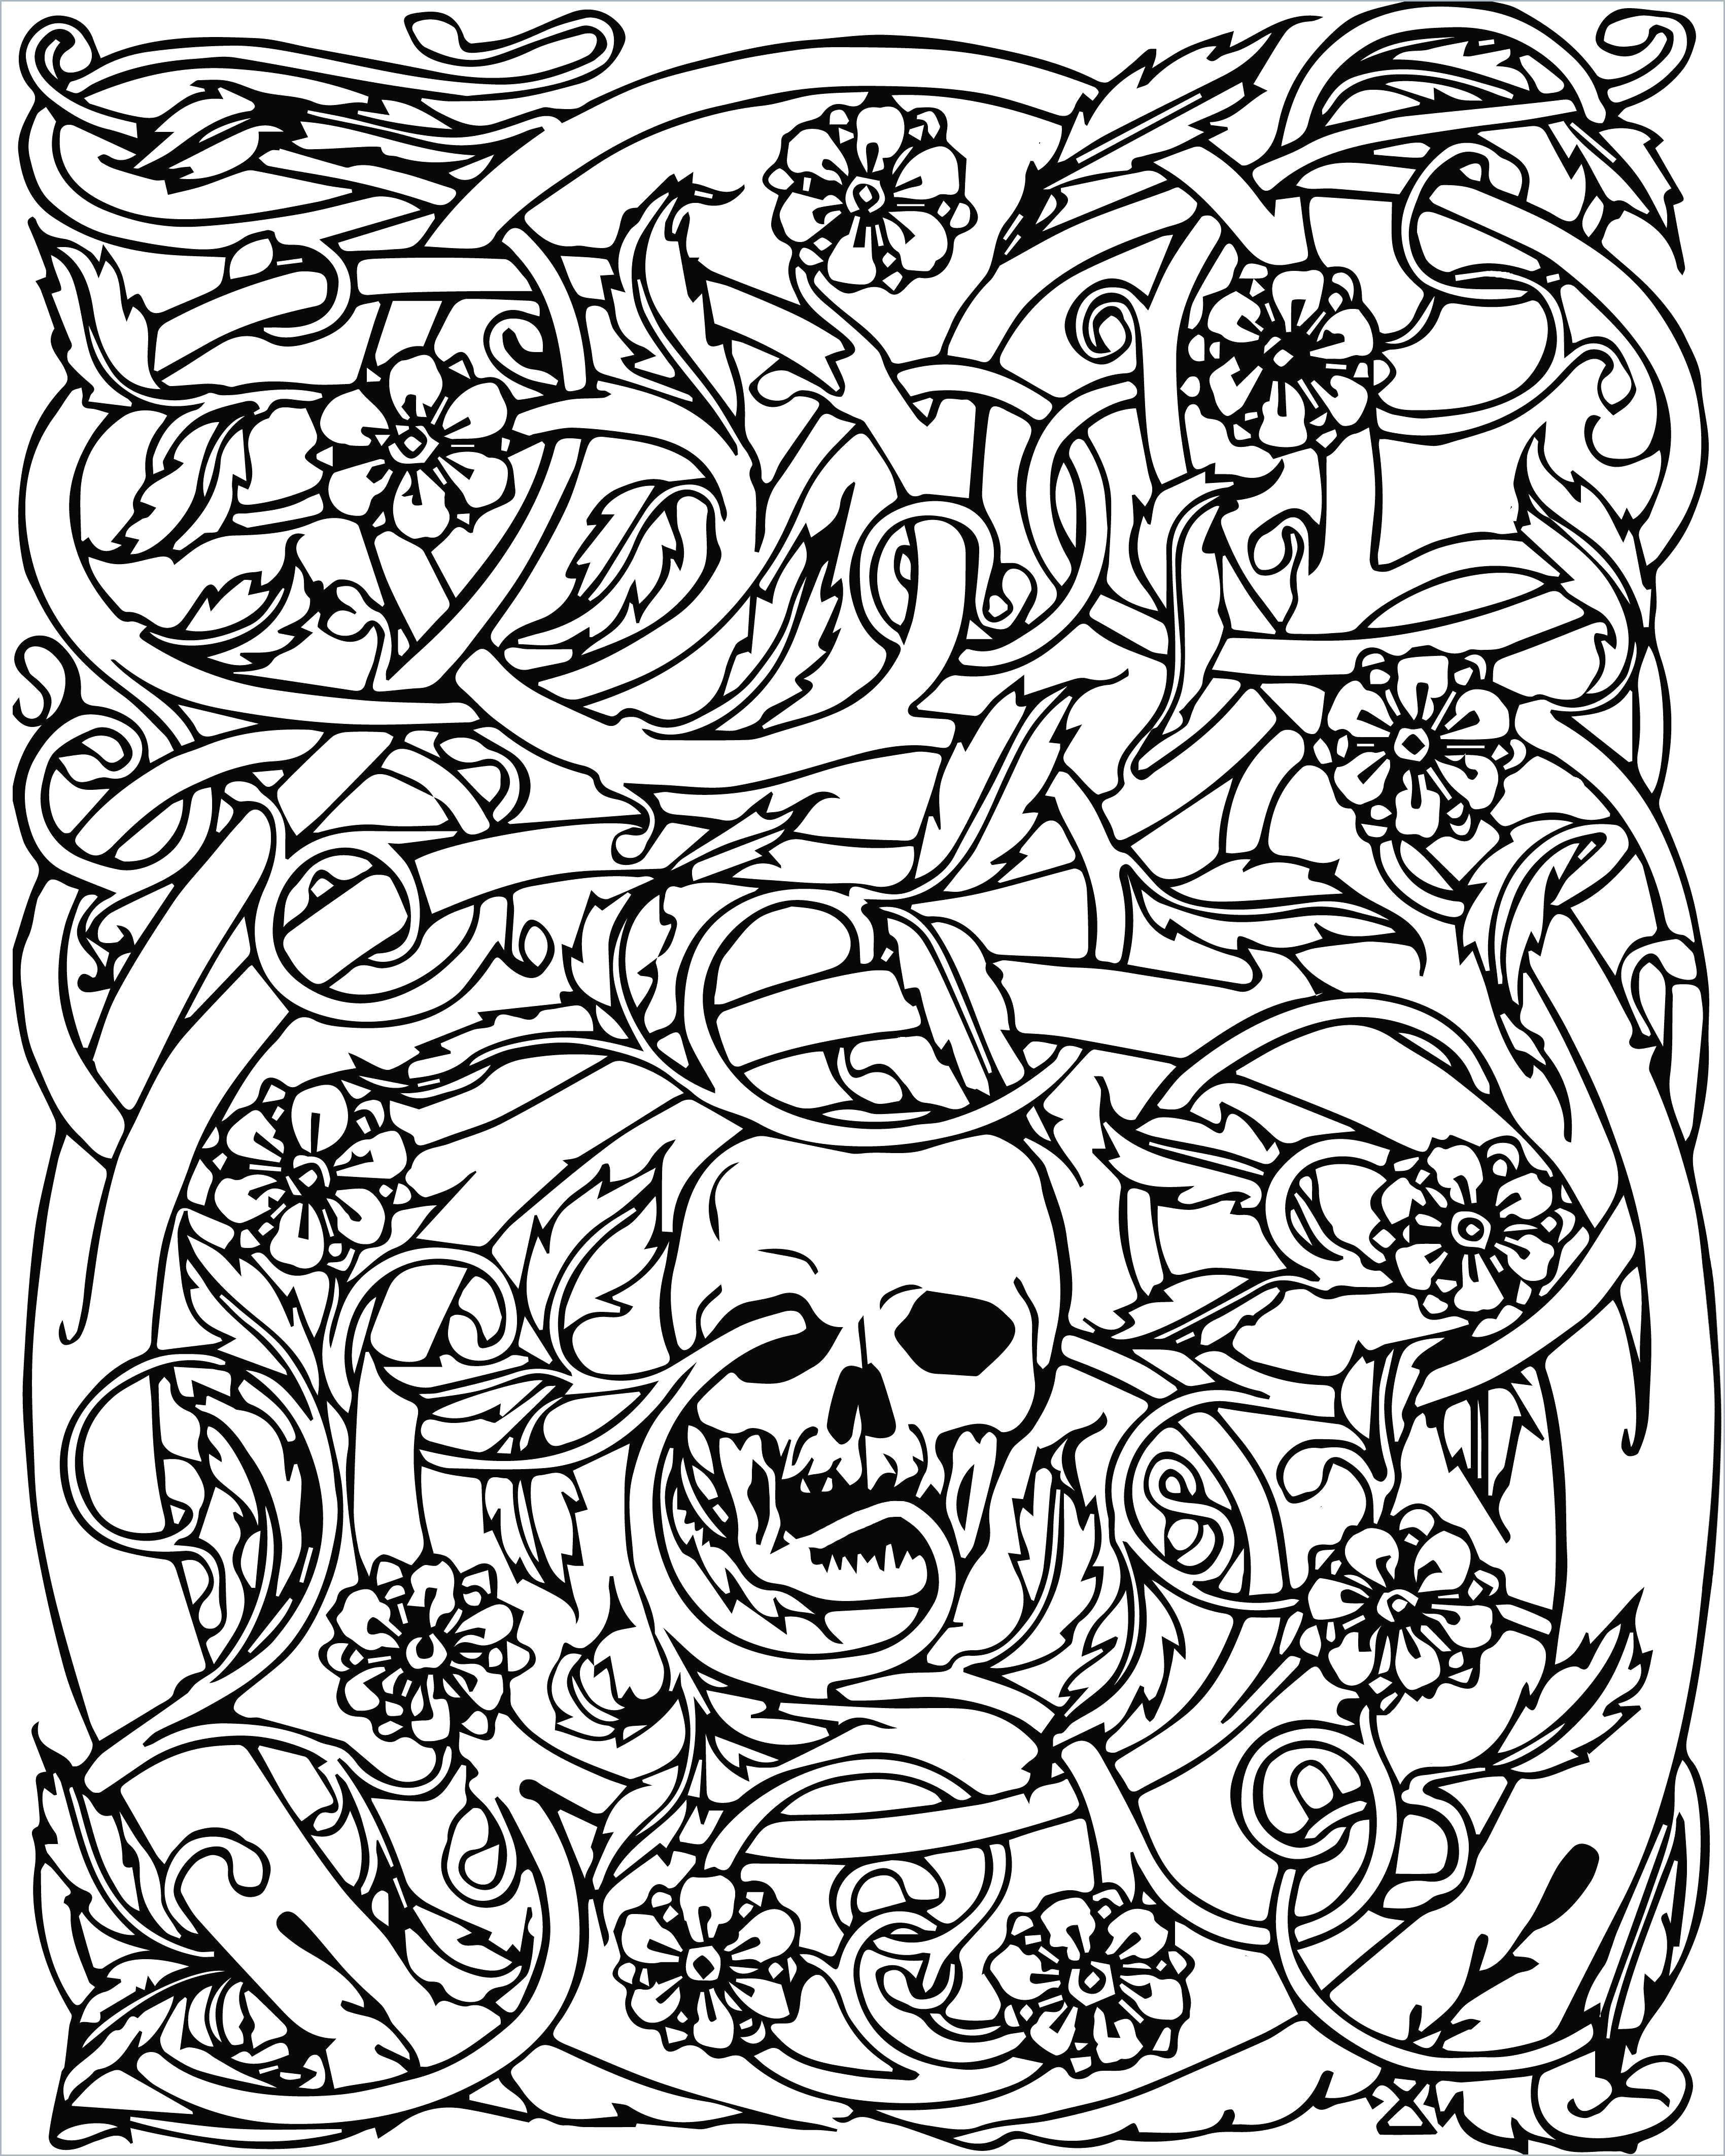 easy coloring pages halloween fresh free adult coloring pages halloween of easy coloring pages halloween awesome